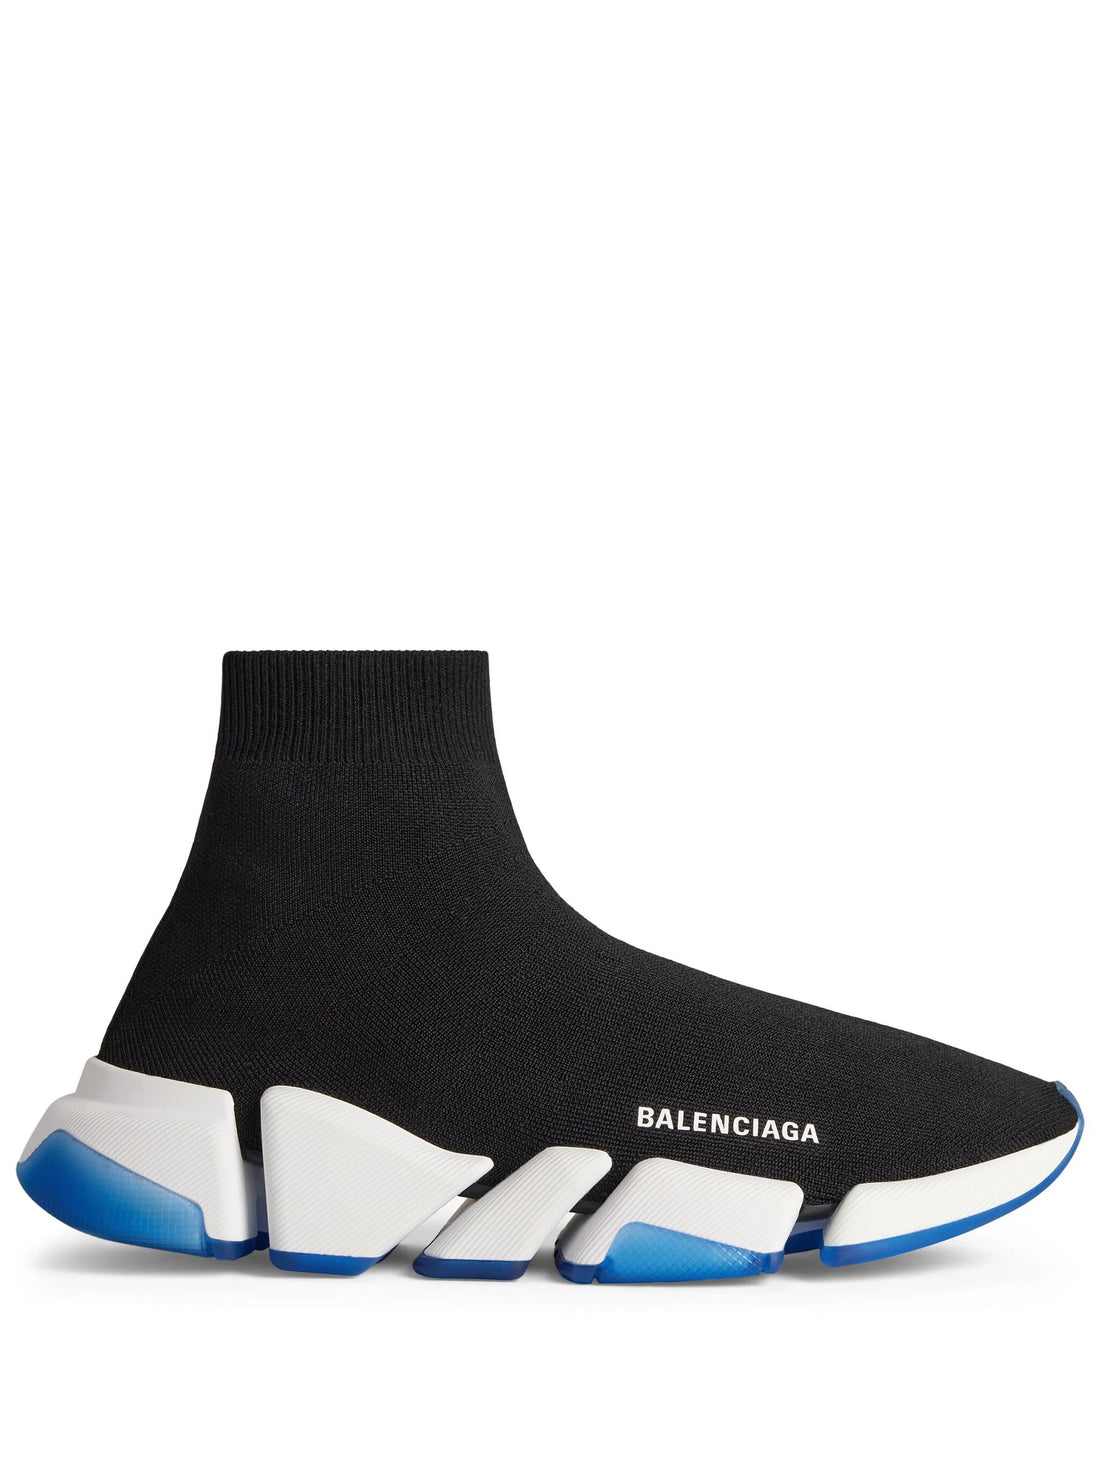 BALENCIAGA Speed 2.0 Clear Sole Recycled Knit Sneakers Black/White/Blue - MAISONDEFASHION.COM